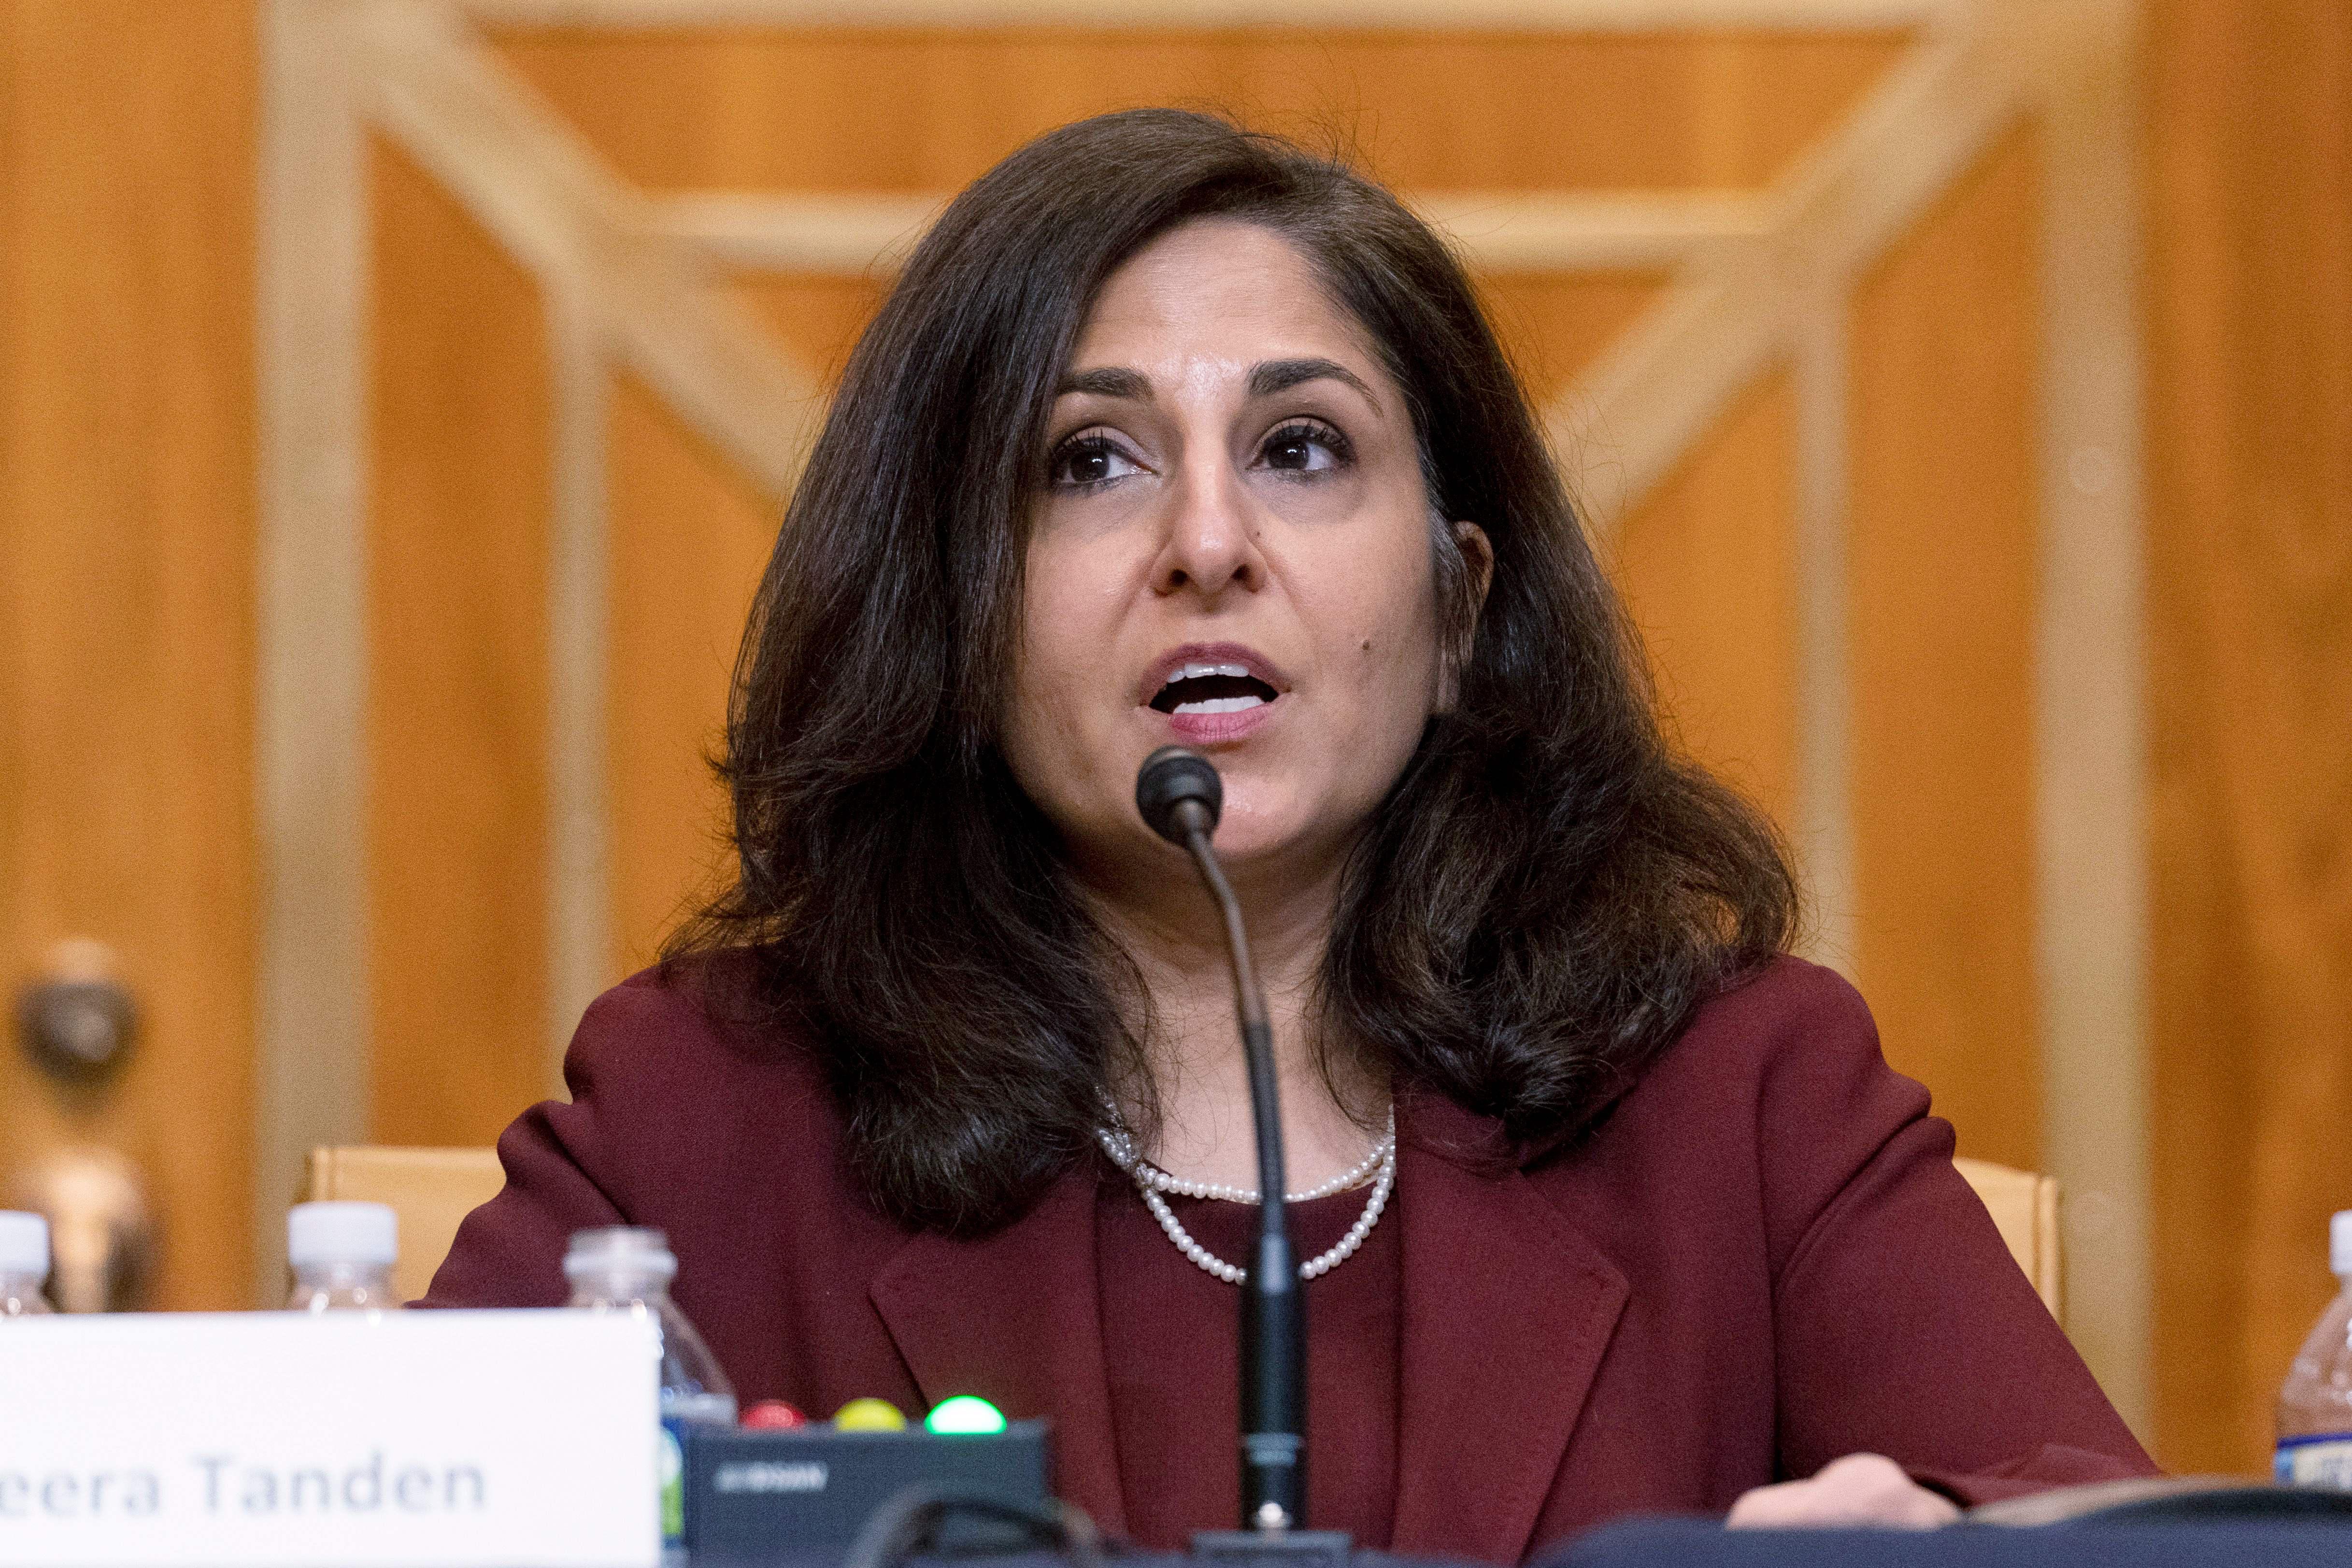 Neera Tanden, nominee for Director of the Office of Management and Budget, testifies on Capitol Hill in Washington, DC on February 10, 2021. 